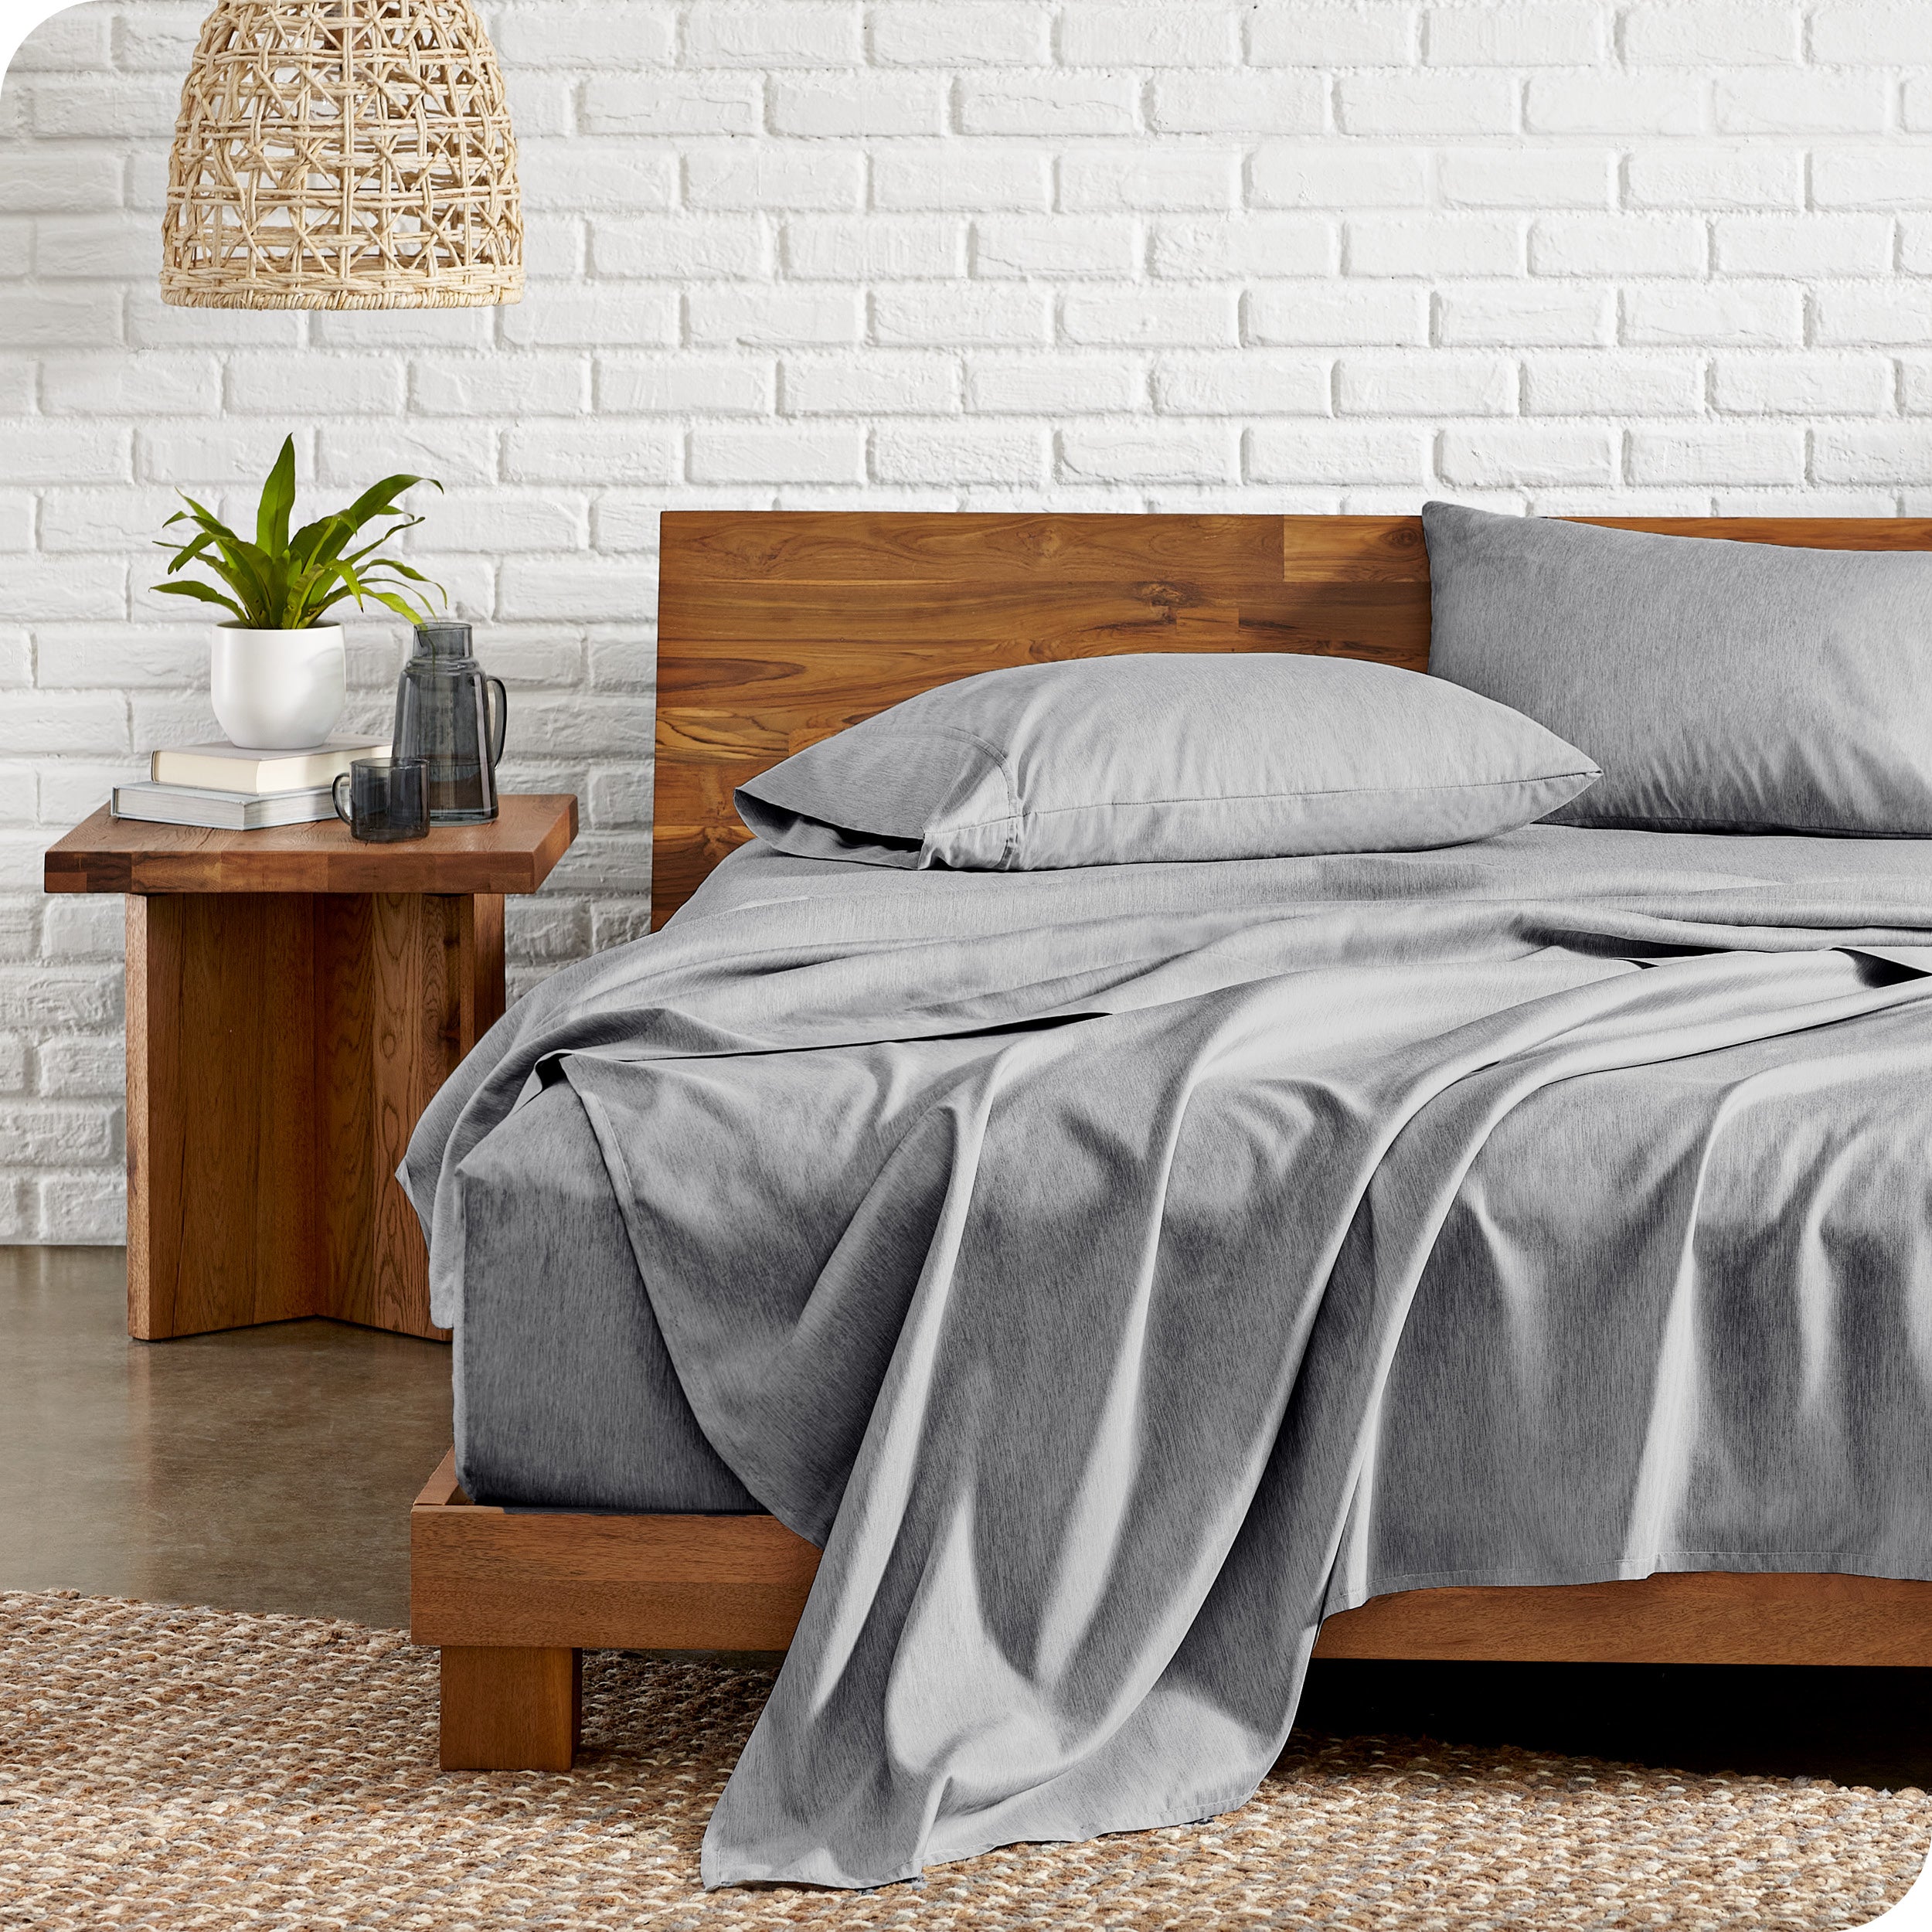 Microfiber sheets on a bed with a wooden headboard